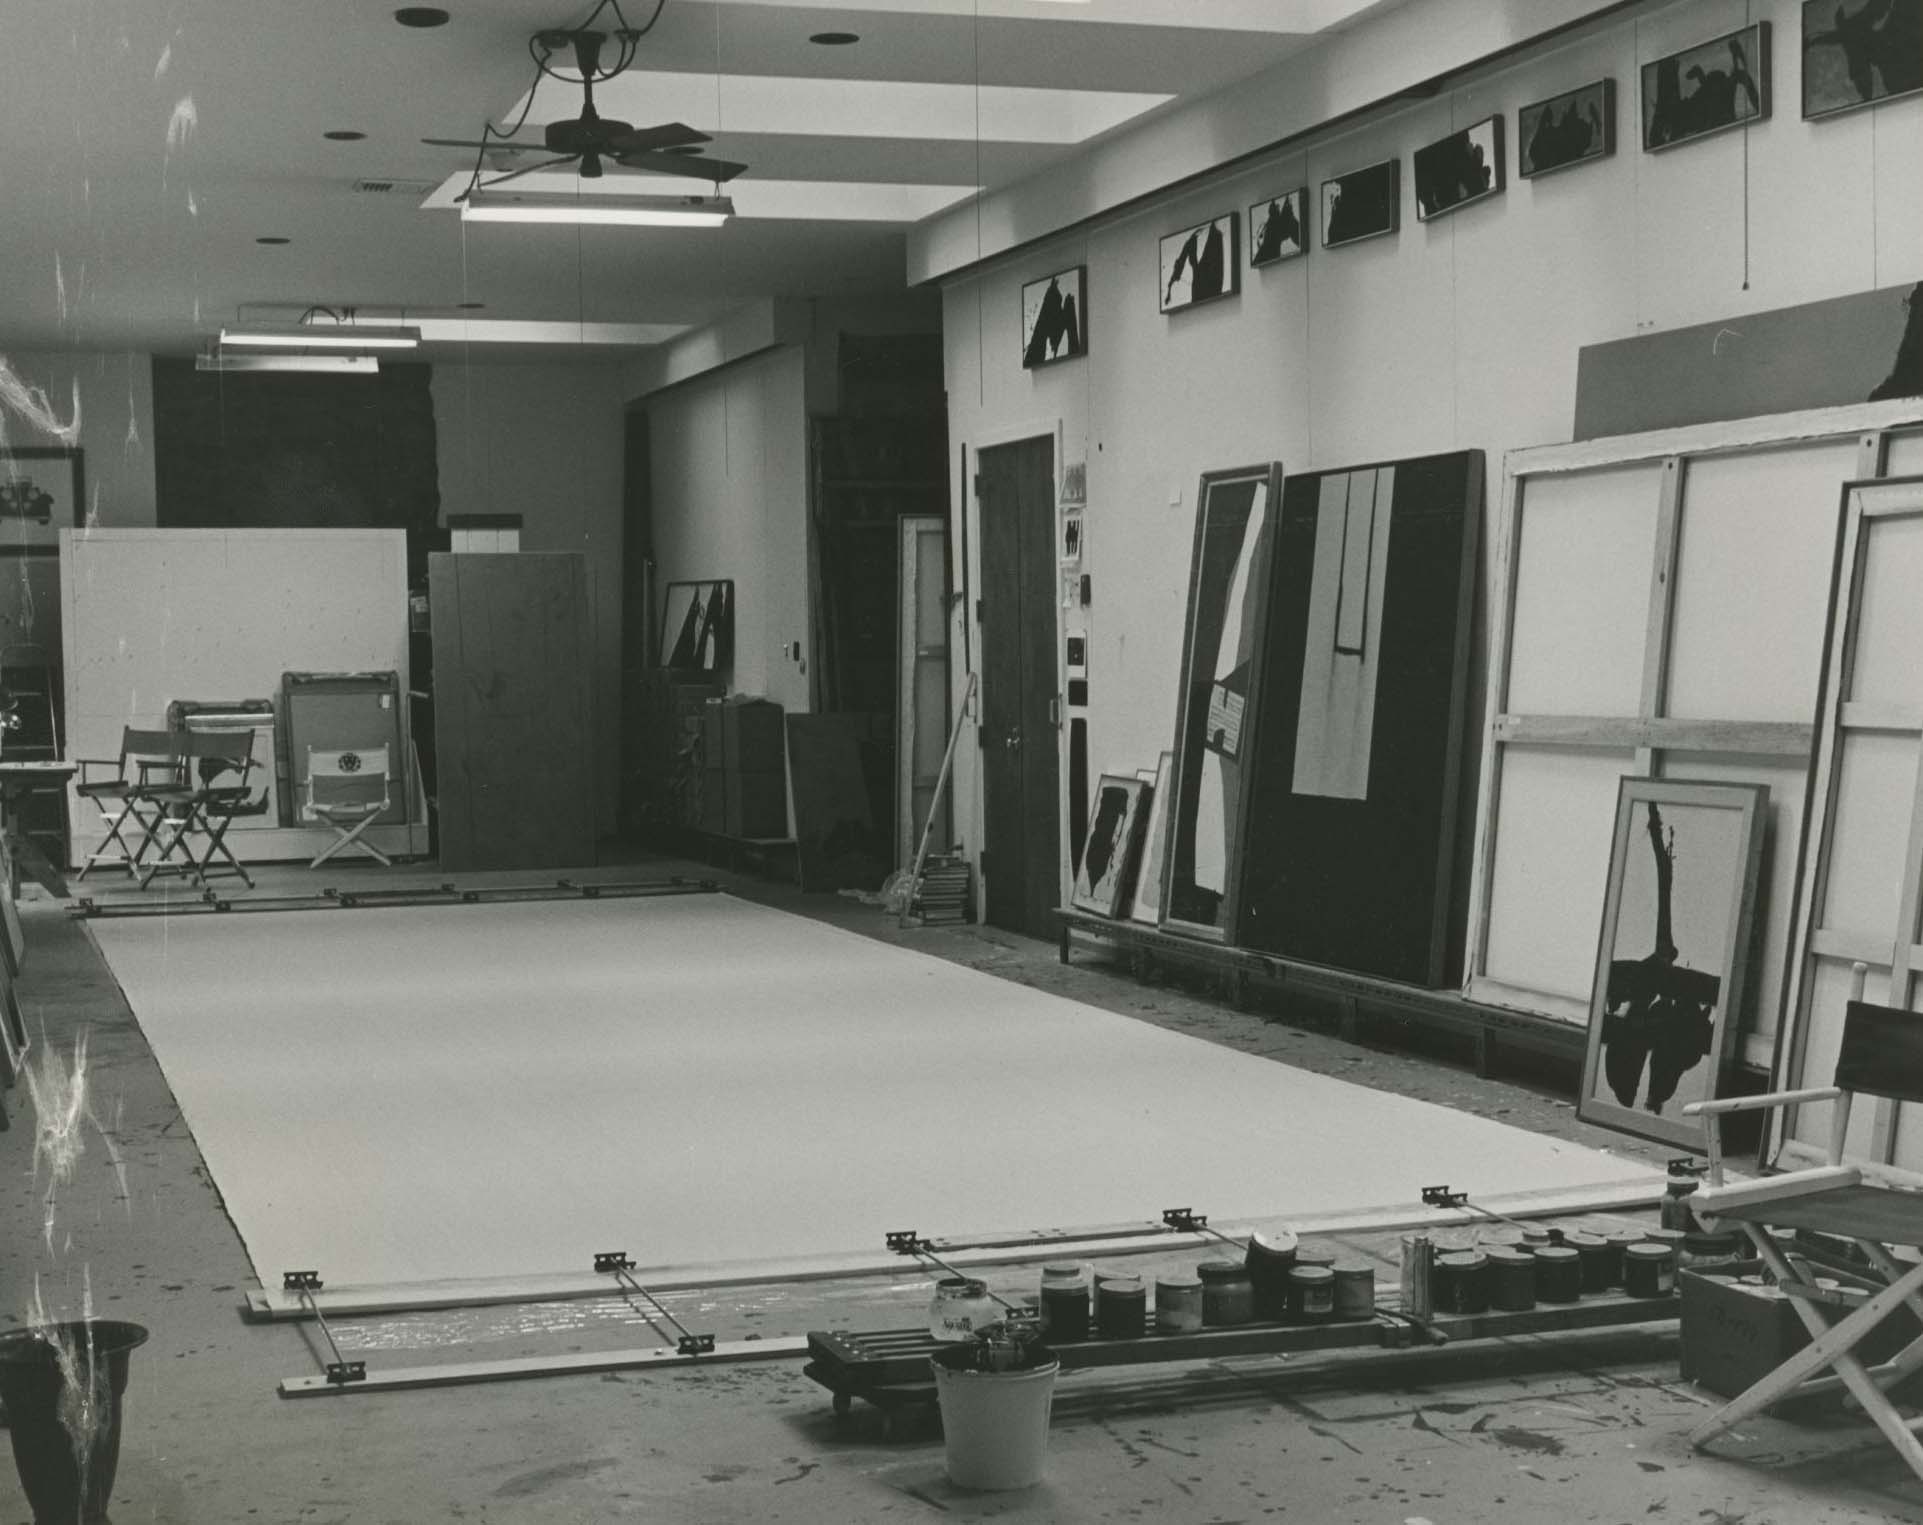 Motherwell’s Greenwich studio with stretched canvases leaning against the wall and a large canvas on the floor, 1974